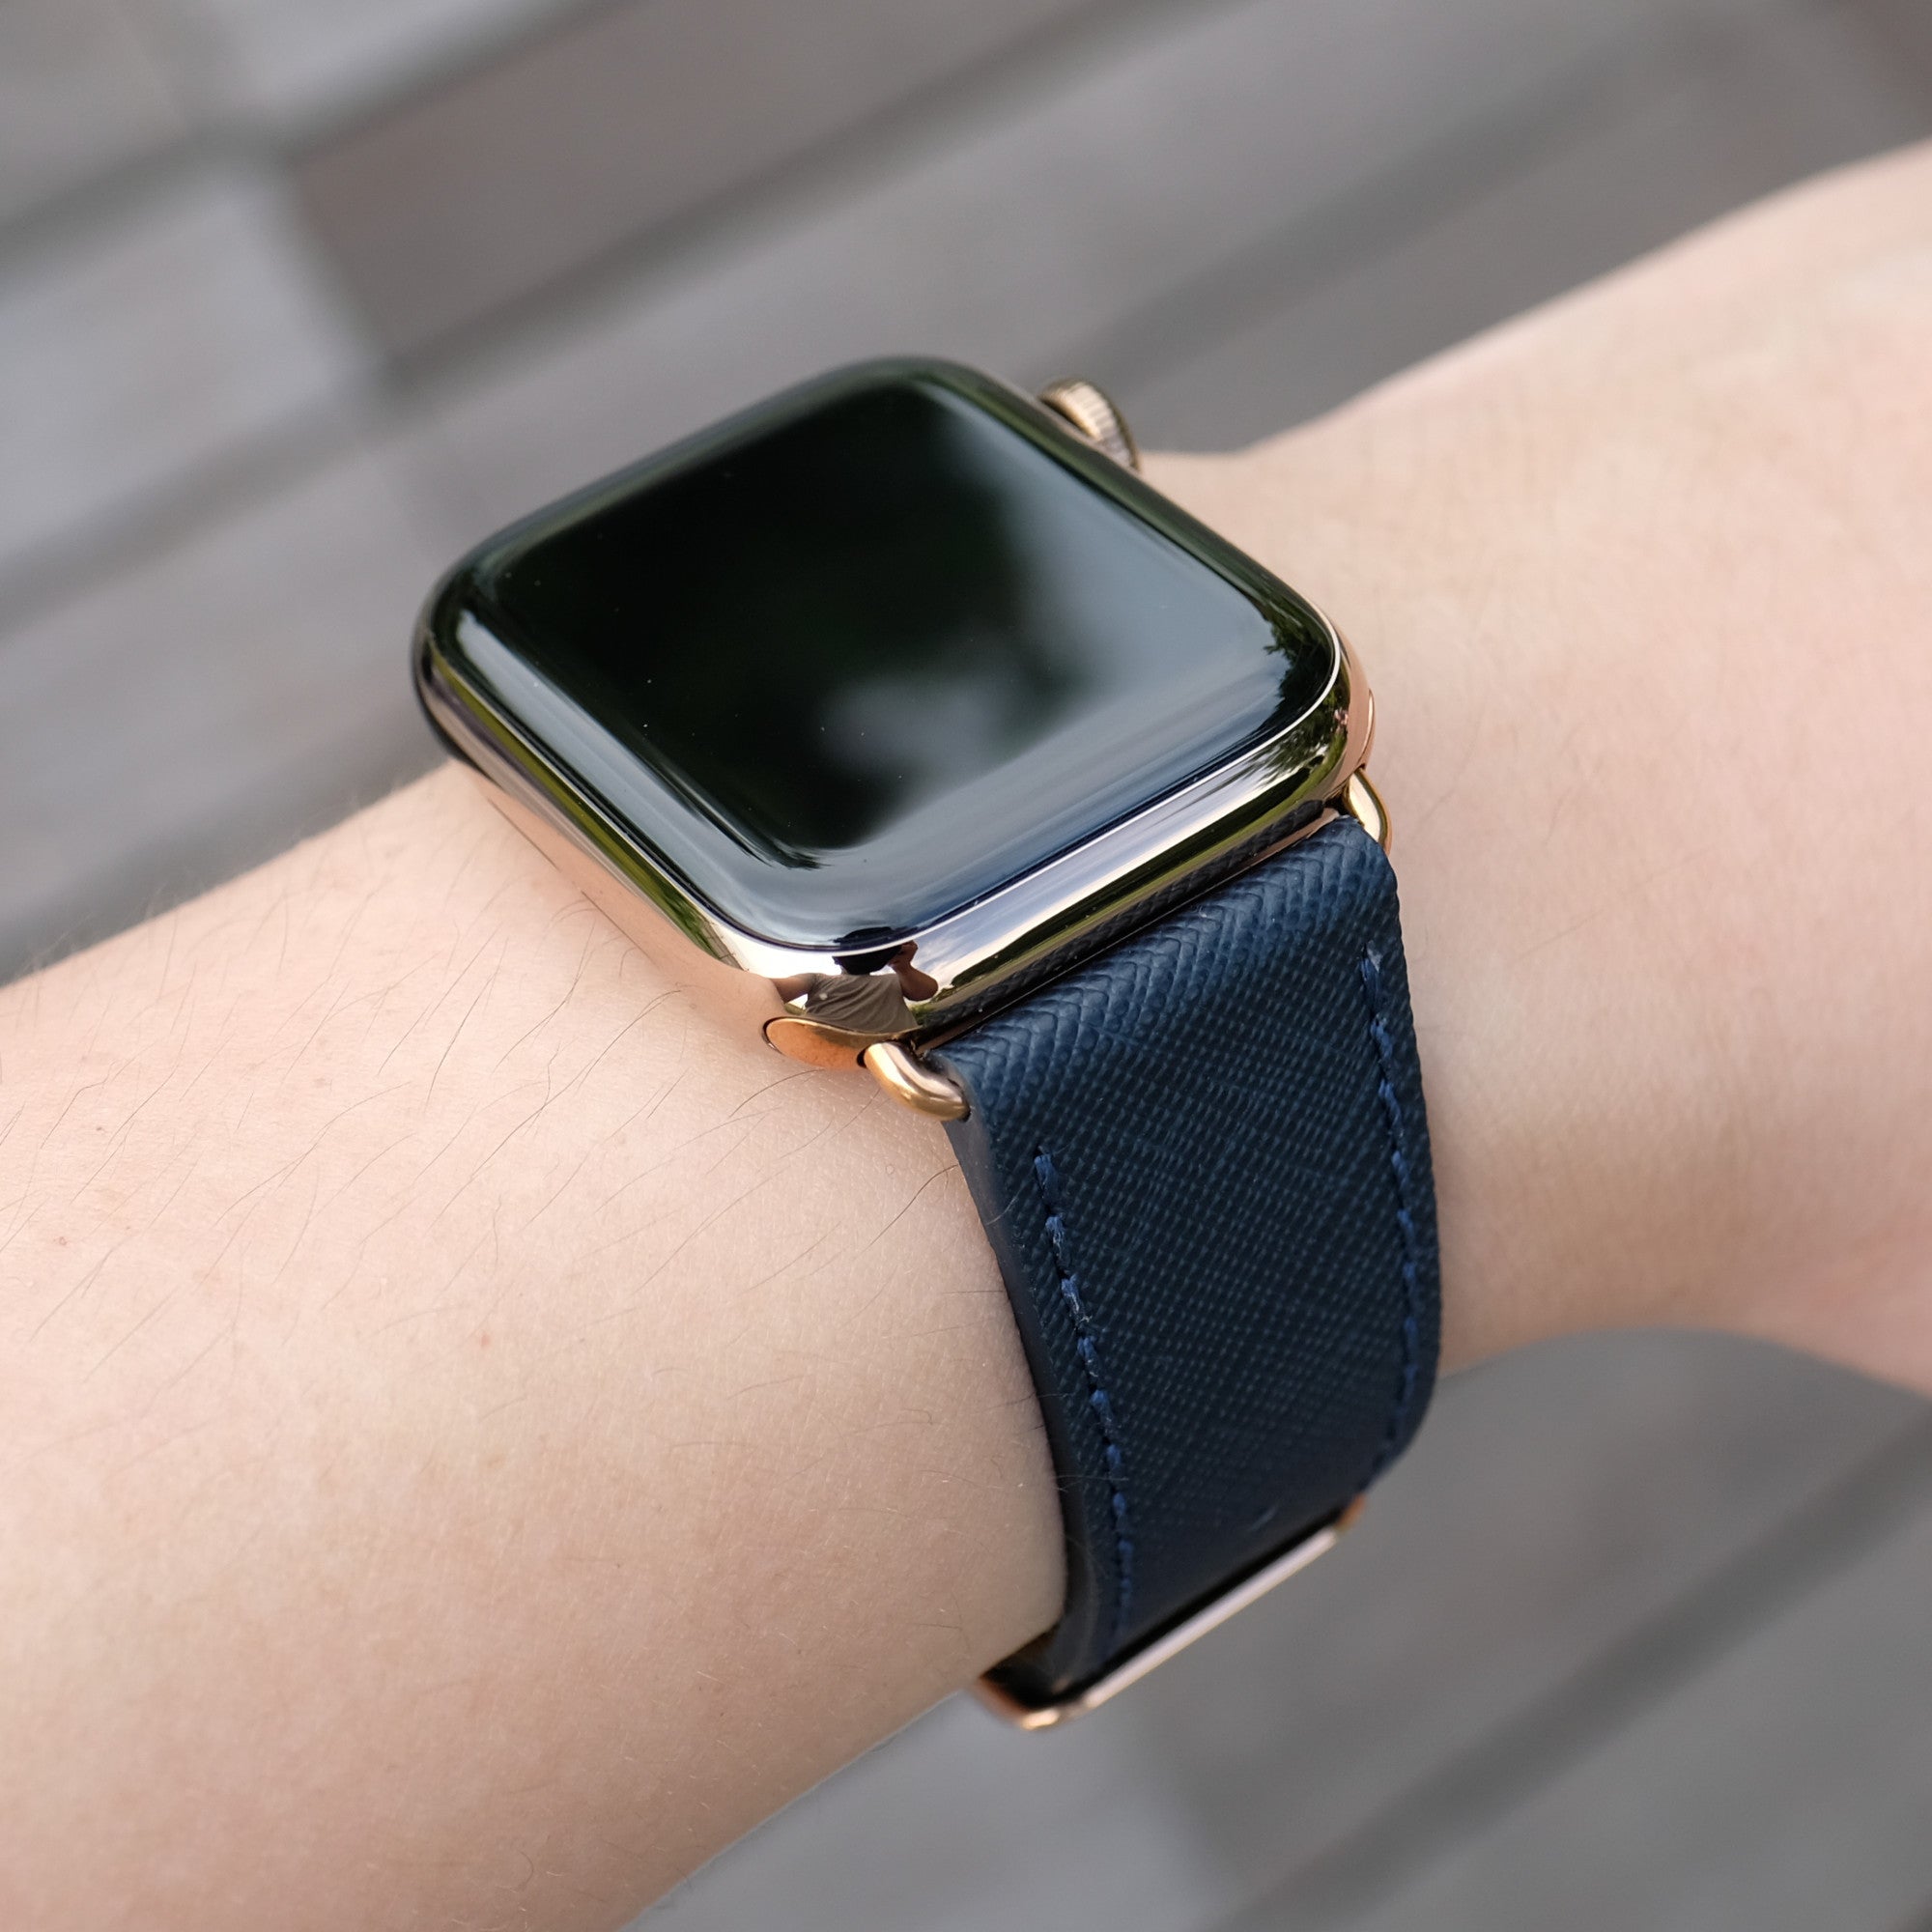 Pin and Buckle Apple Watch Bands - Saffiano - Textured Leather Apple Watch Bands - Navy Blue - Gold